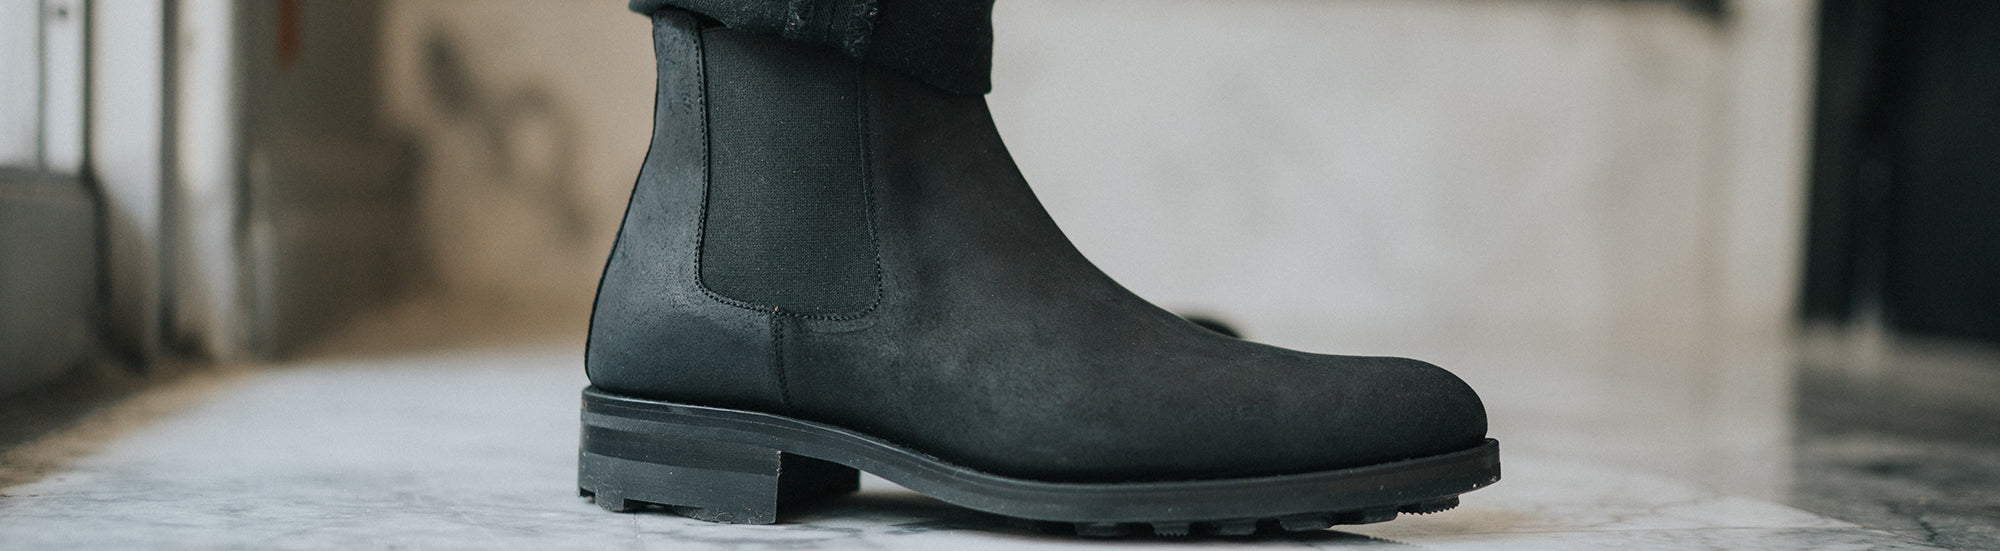 The Drake Boot in Midnight on model, up close side view {{content,hide}}